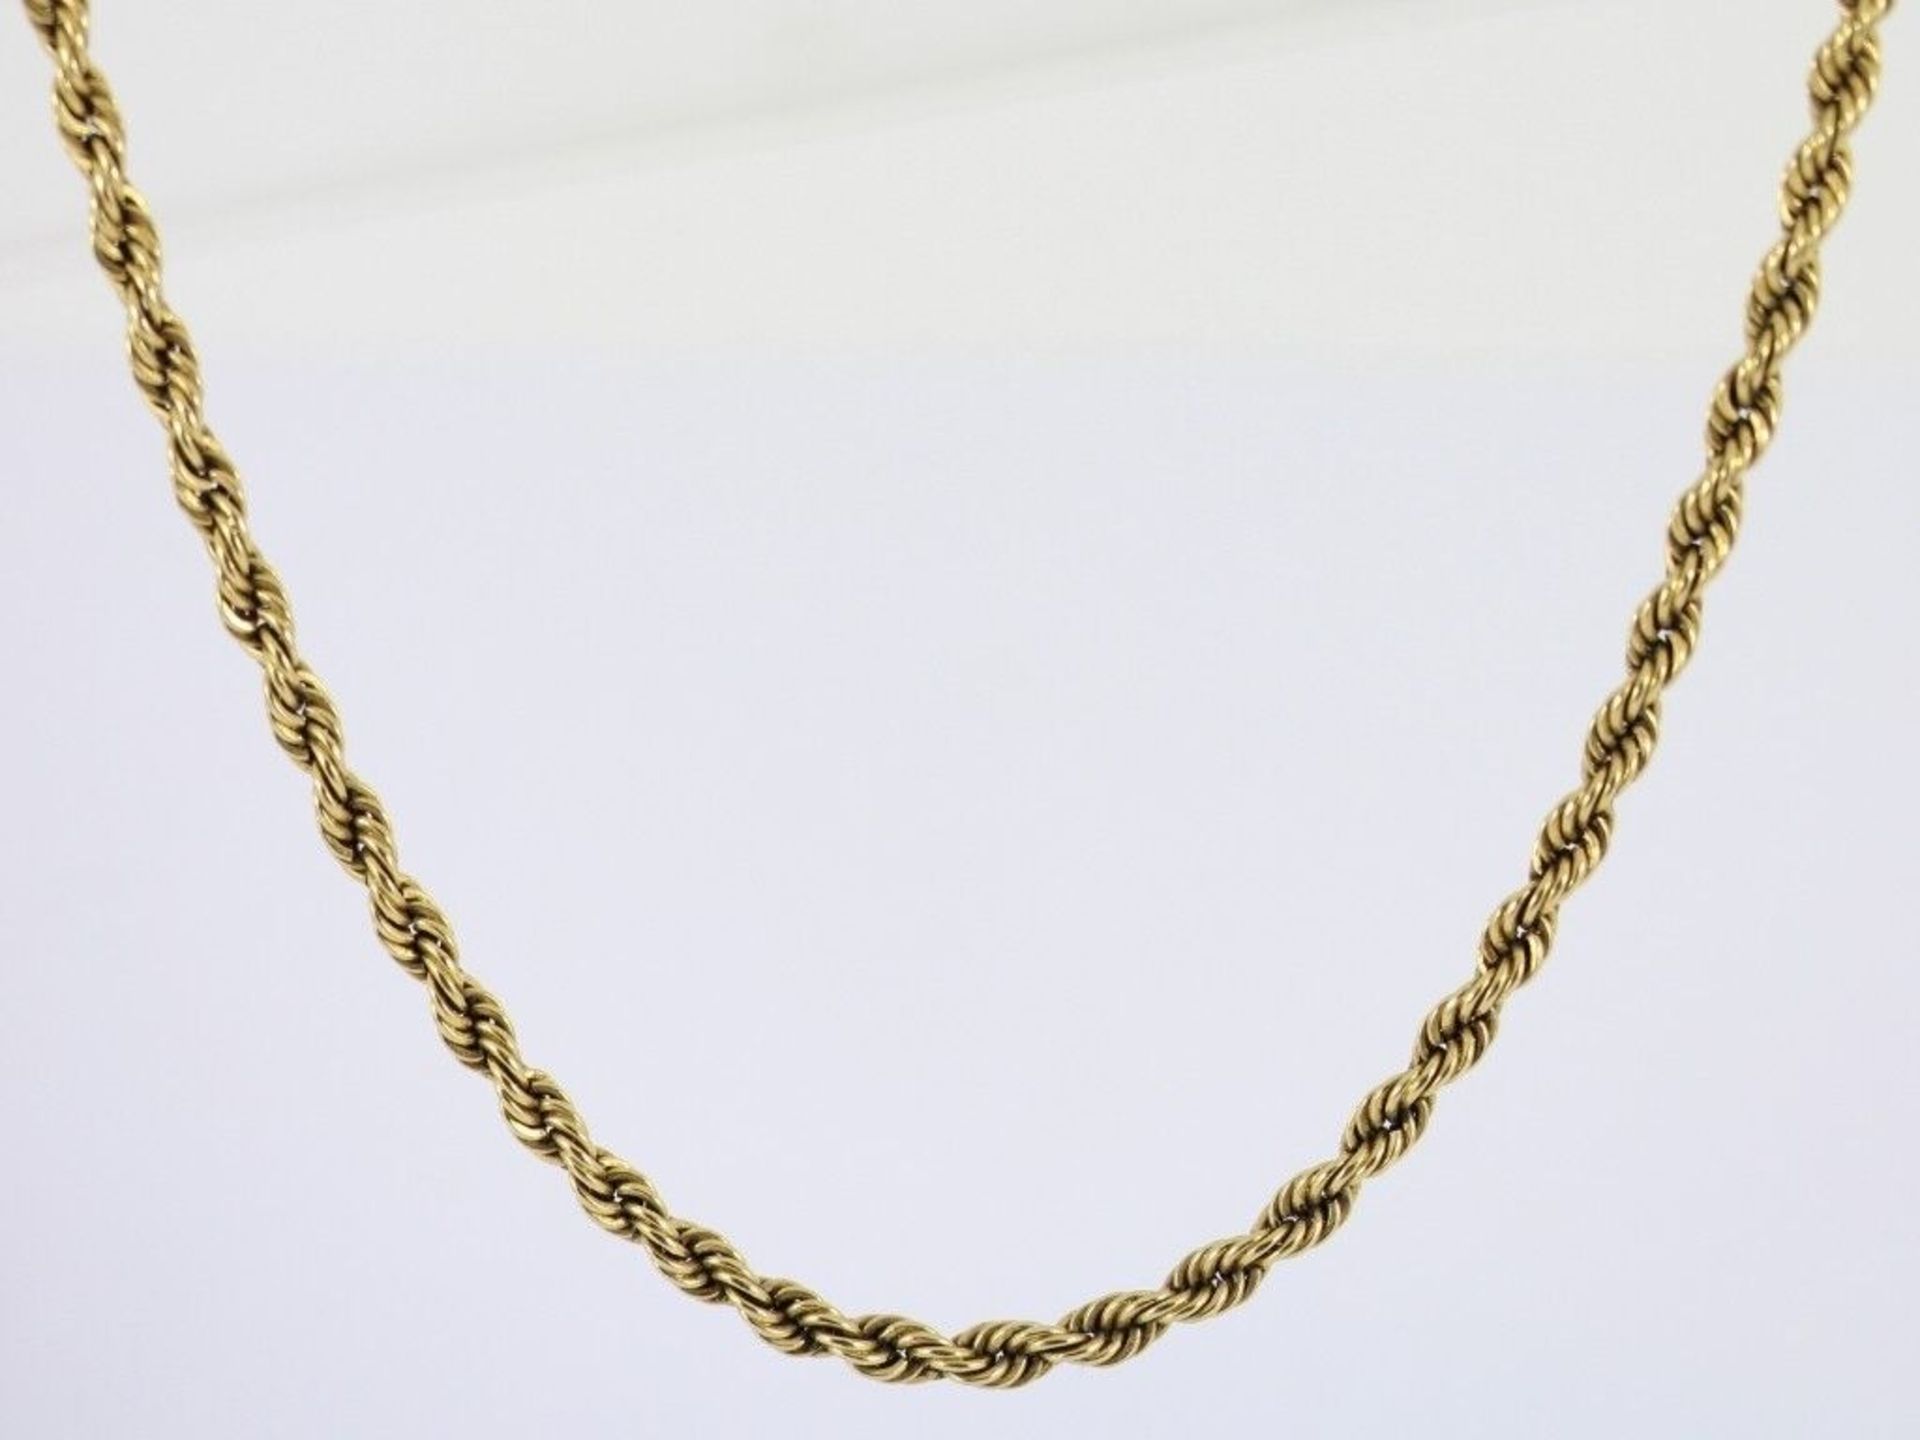 ROPE CHAIN NECKLACE 9CT GOLD STUNNING 15.75" 375 11.7G CT34